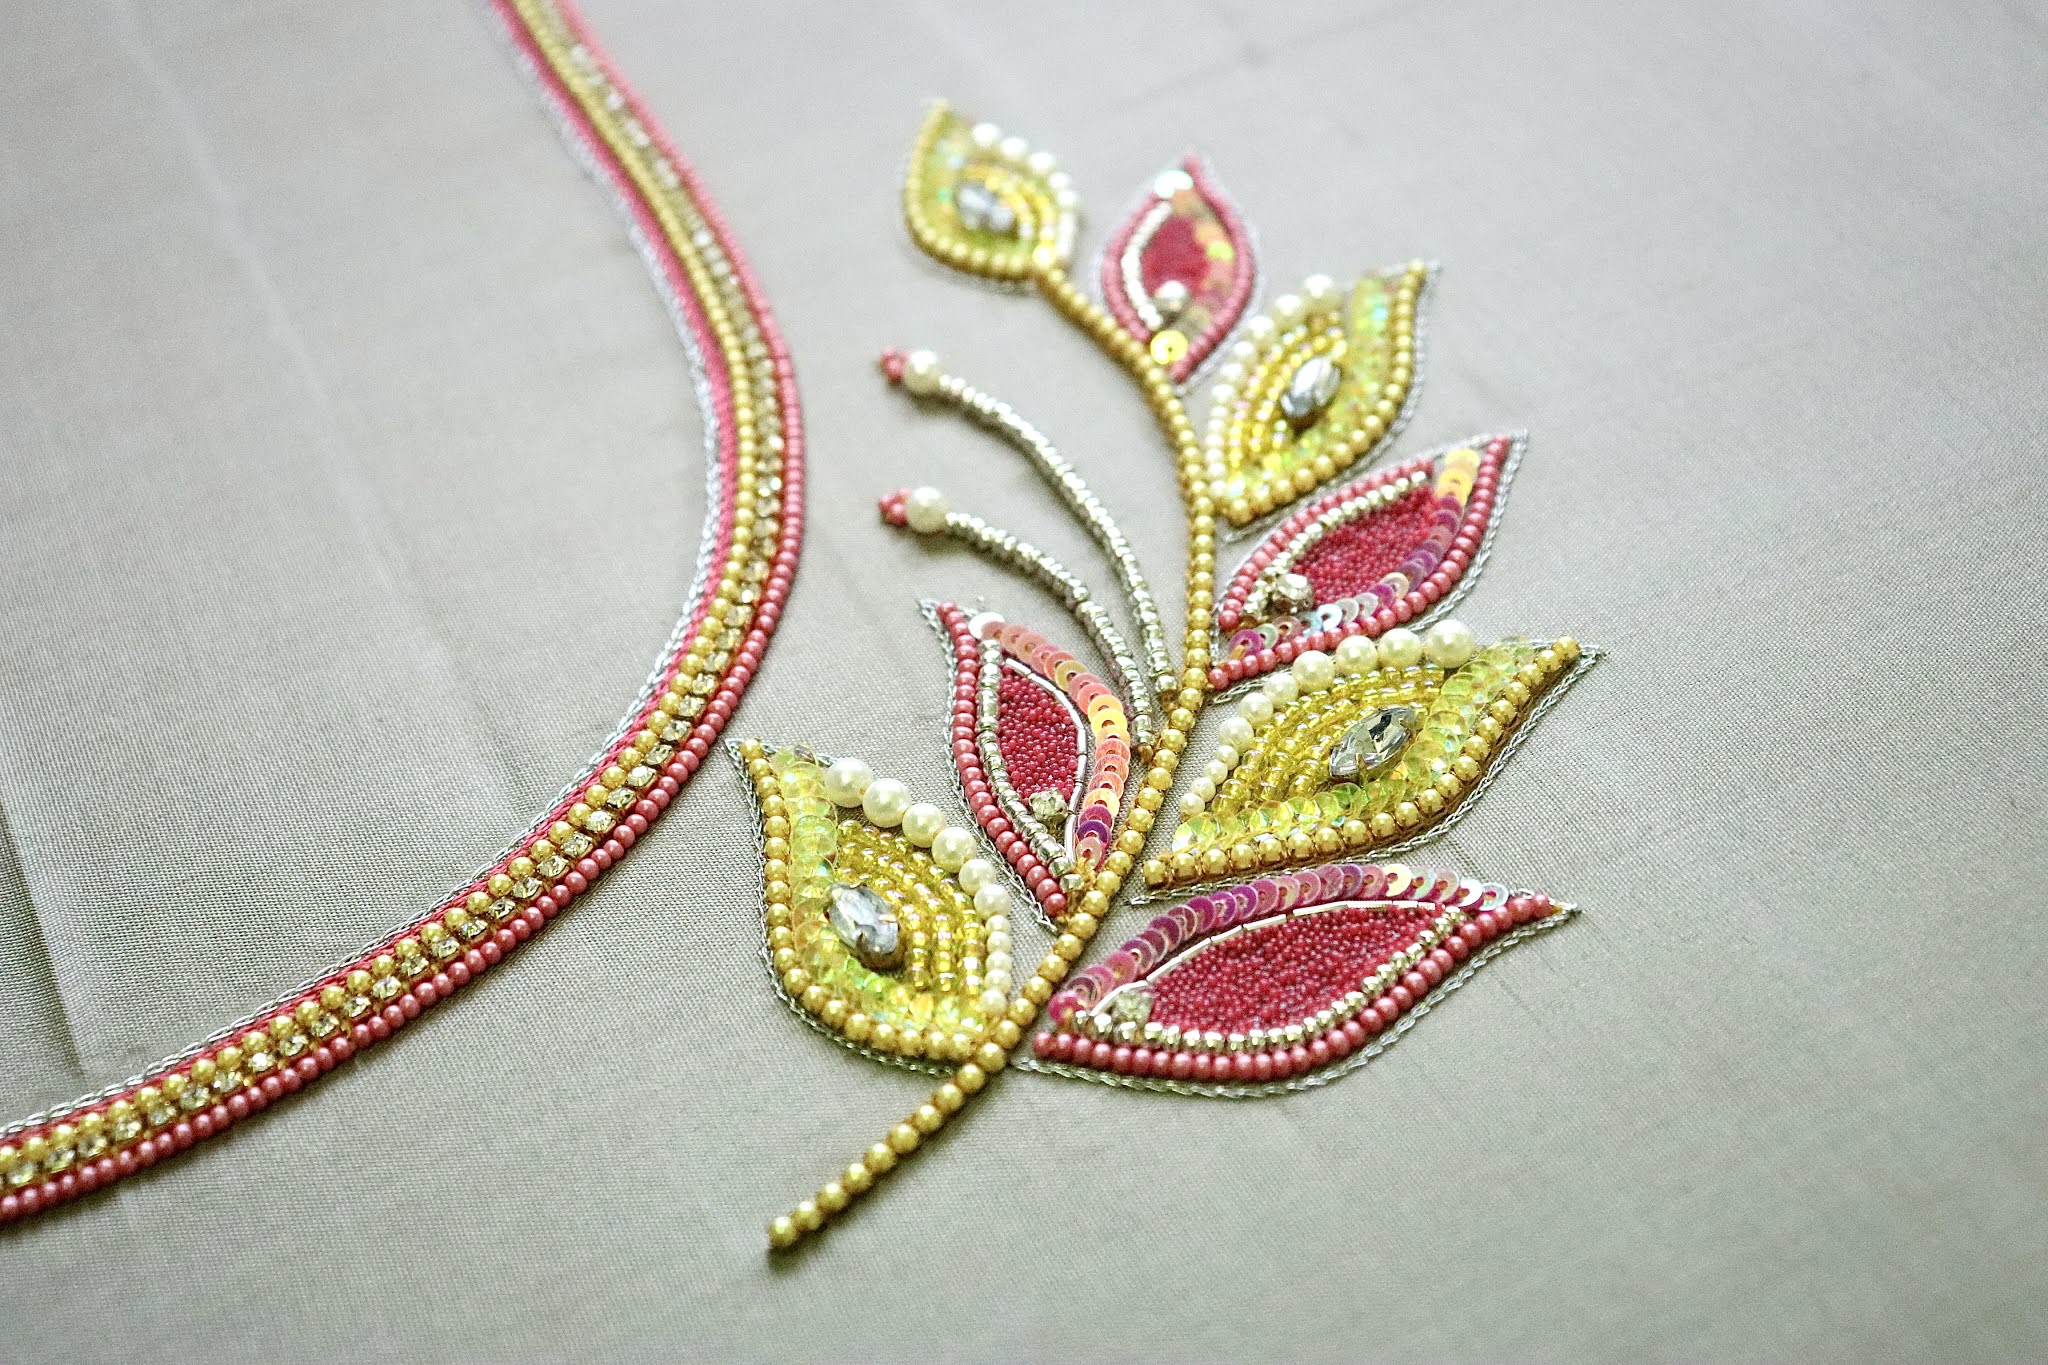 Beads and sequins embroidery